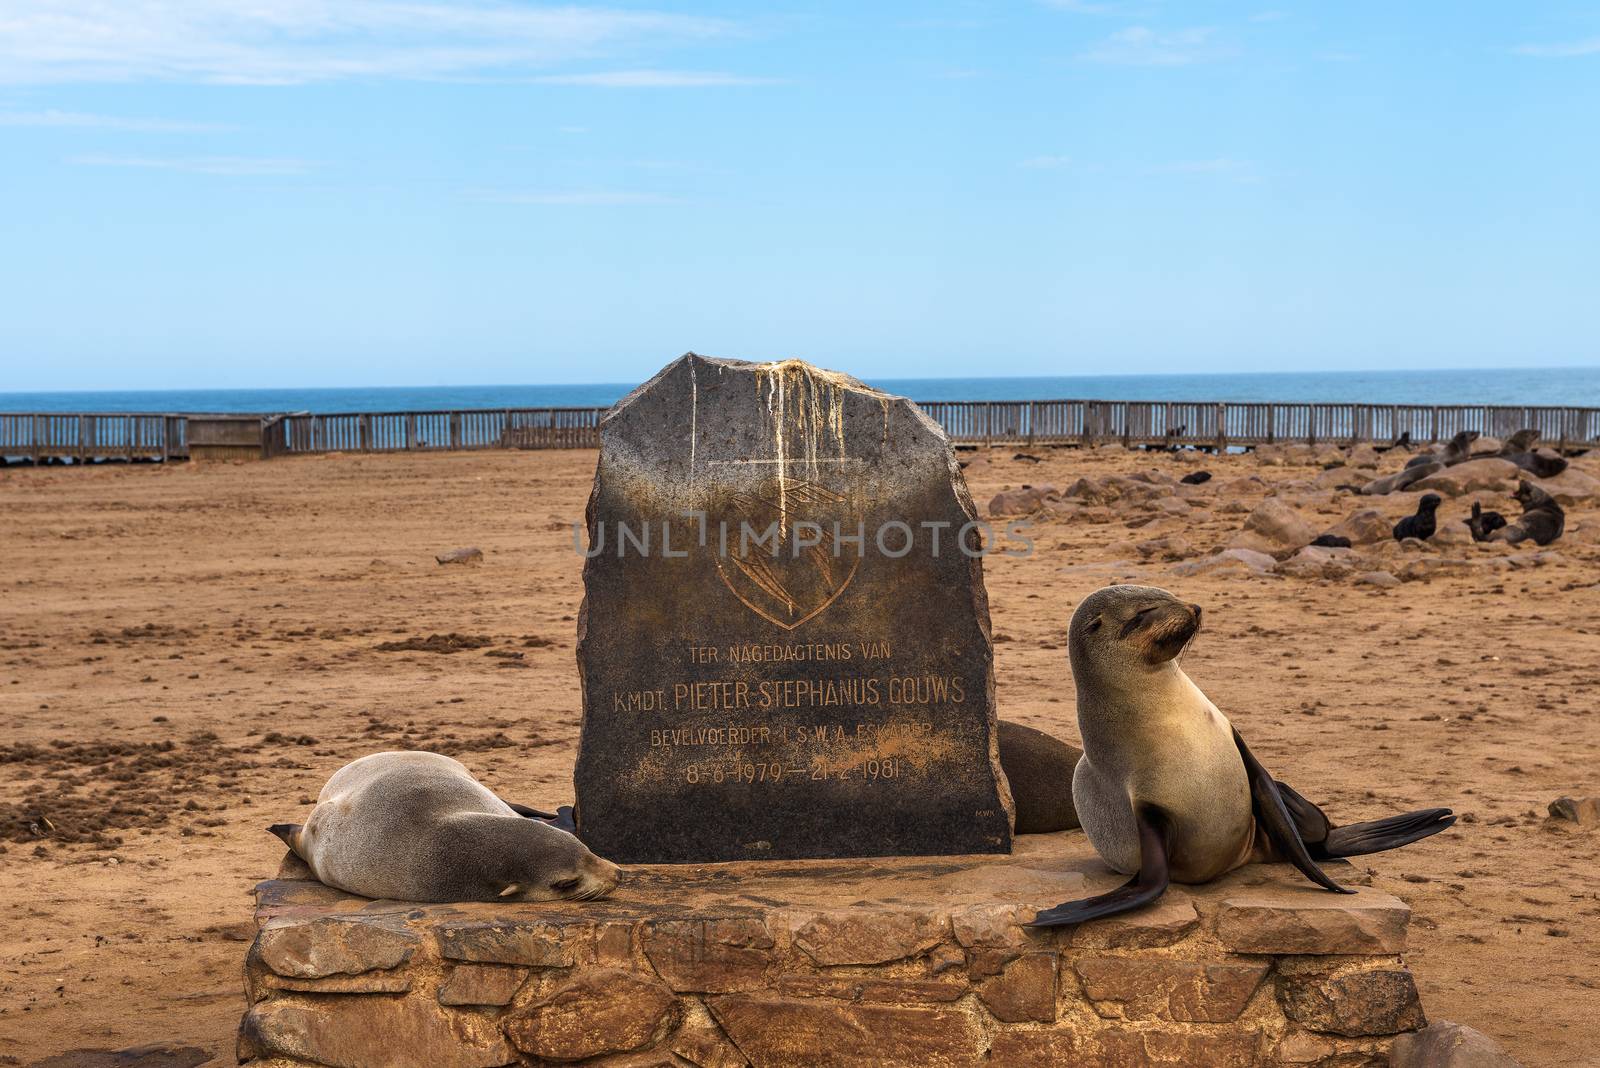 Seals at the Cape Cross Seal Reserve in Skeleton Coast, Namibia by nickfox